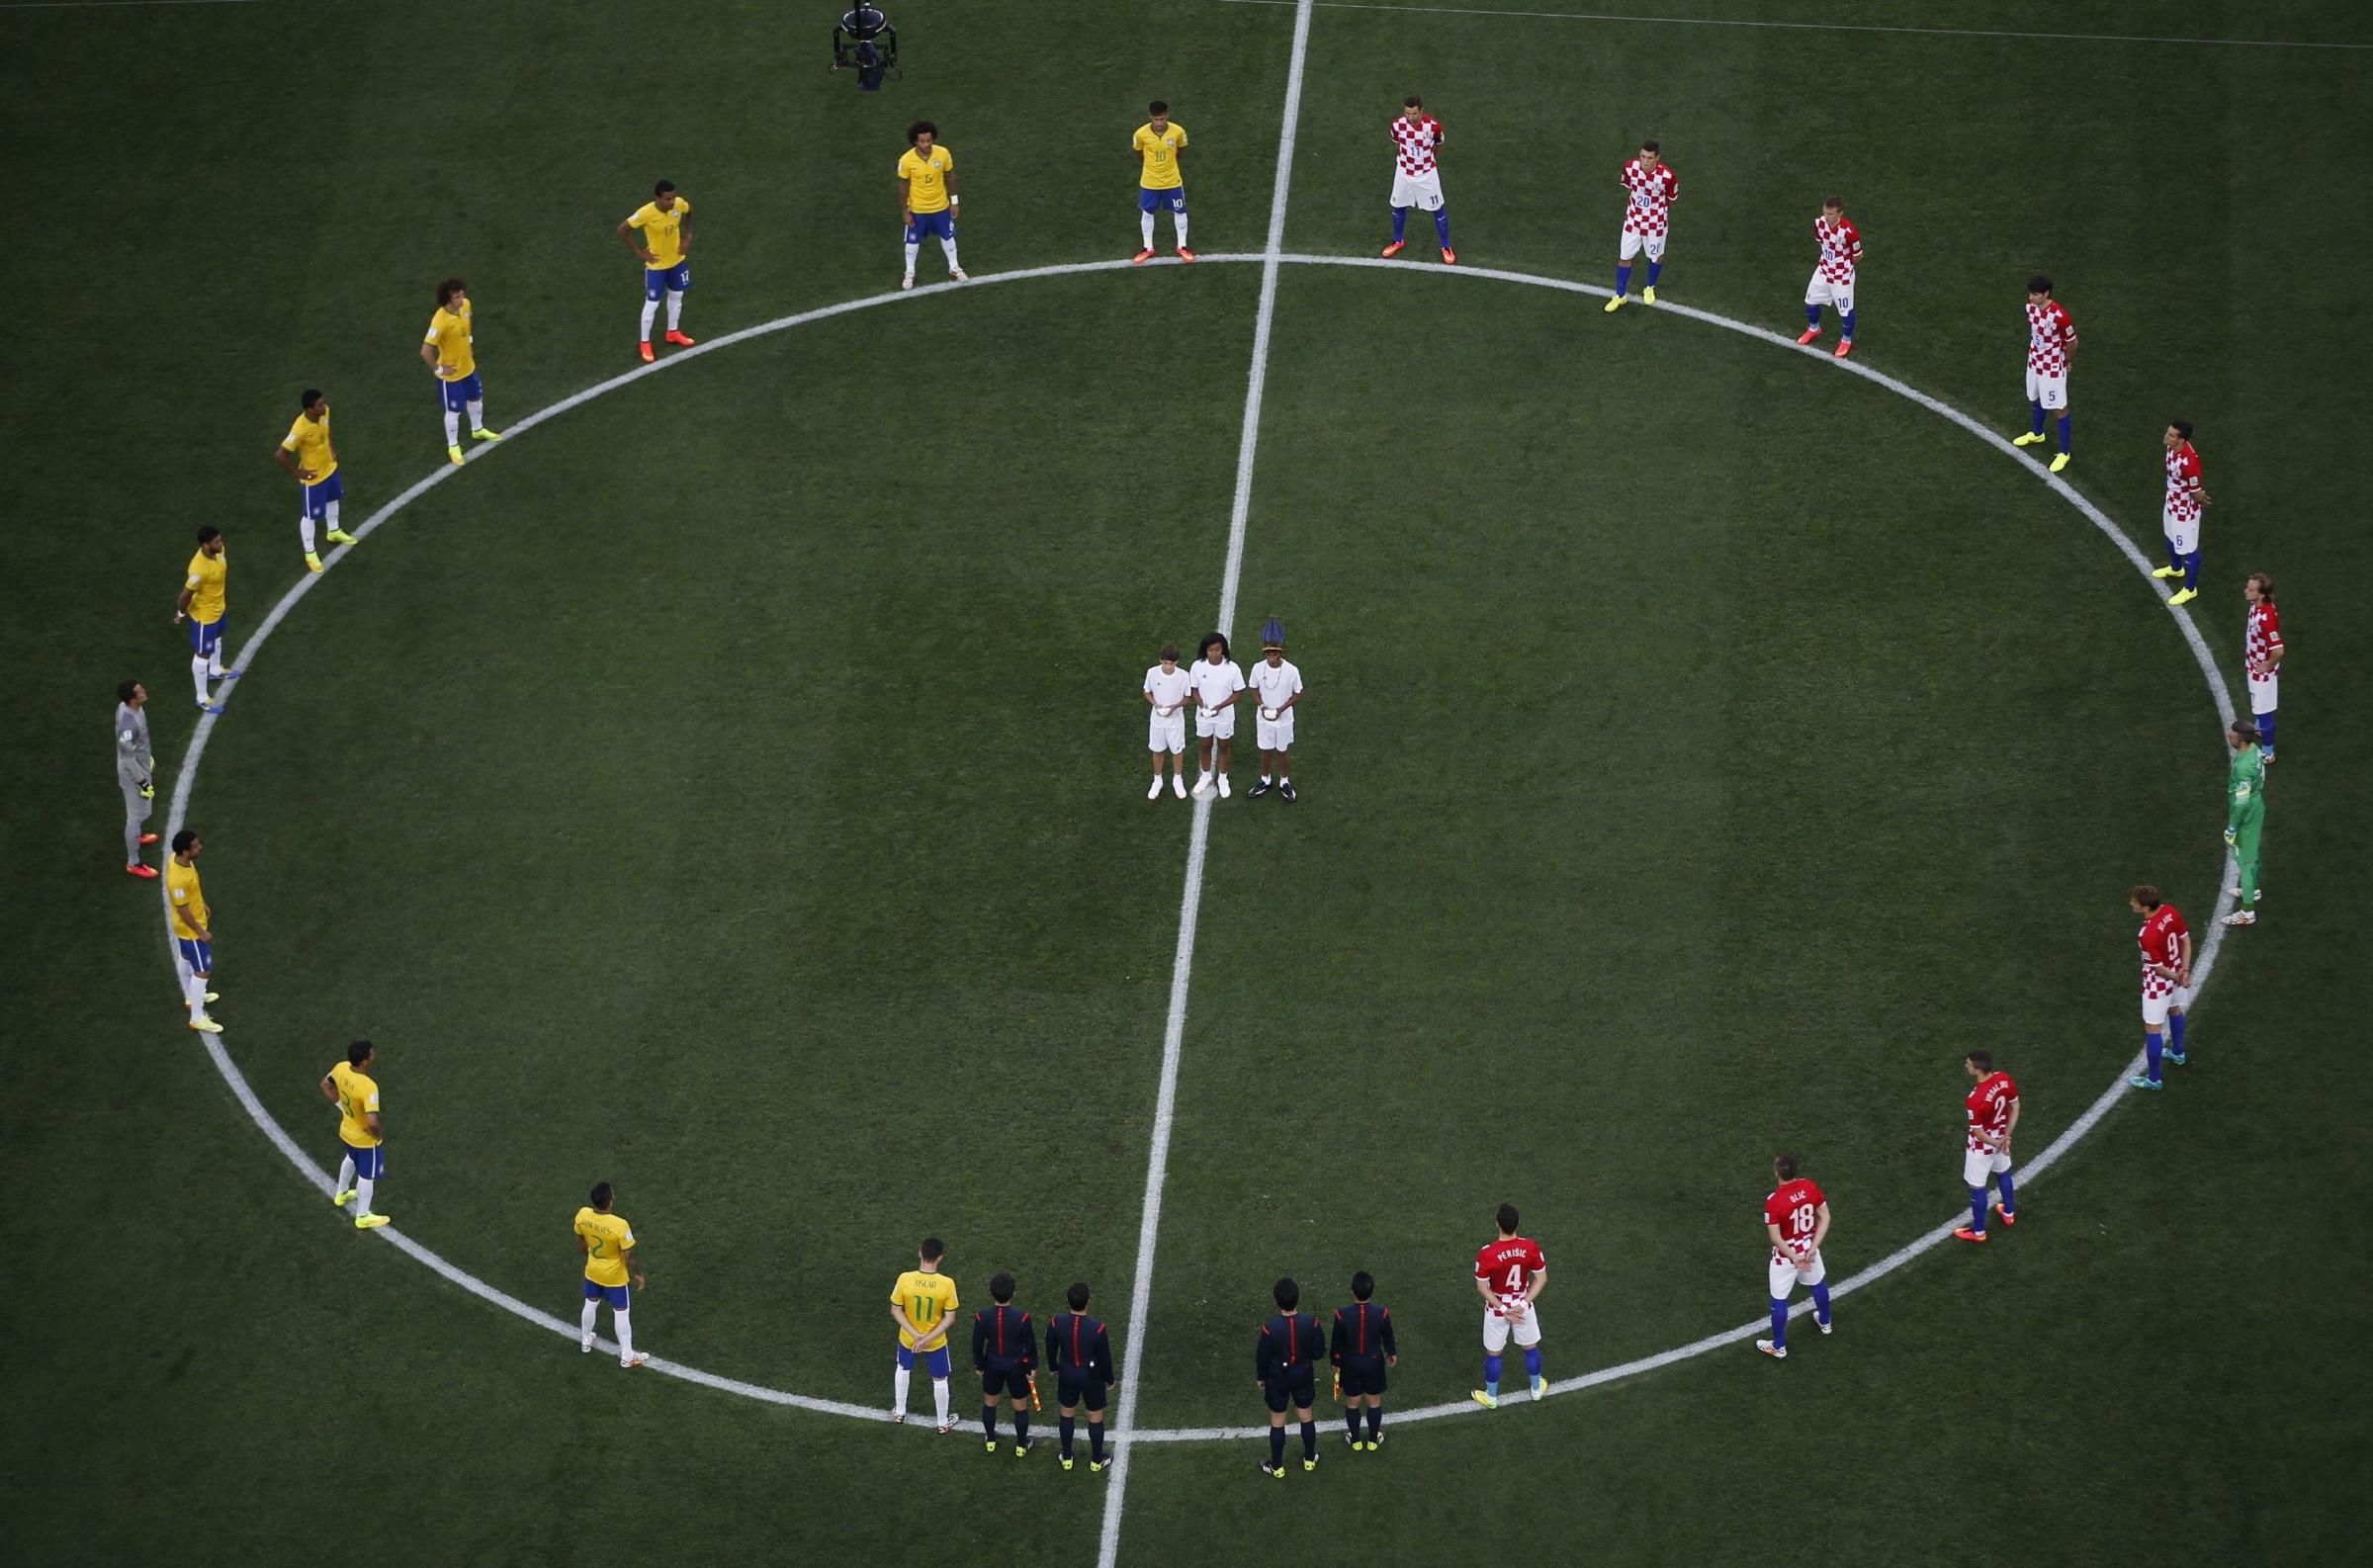 Players stand in a circle as doves are released before kickoff at the 2014 World Cup opening match at the Corinthians arena in Sao Paulo